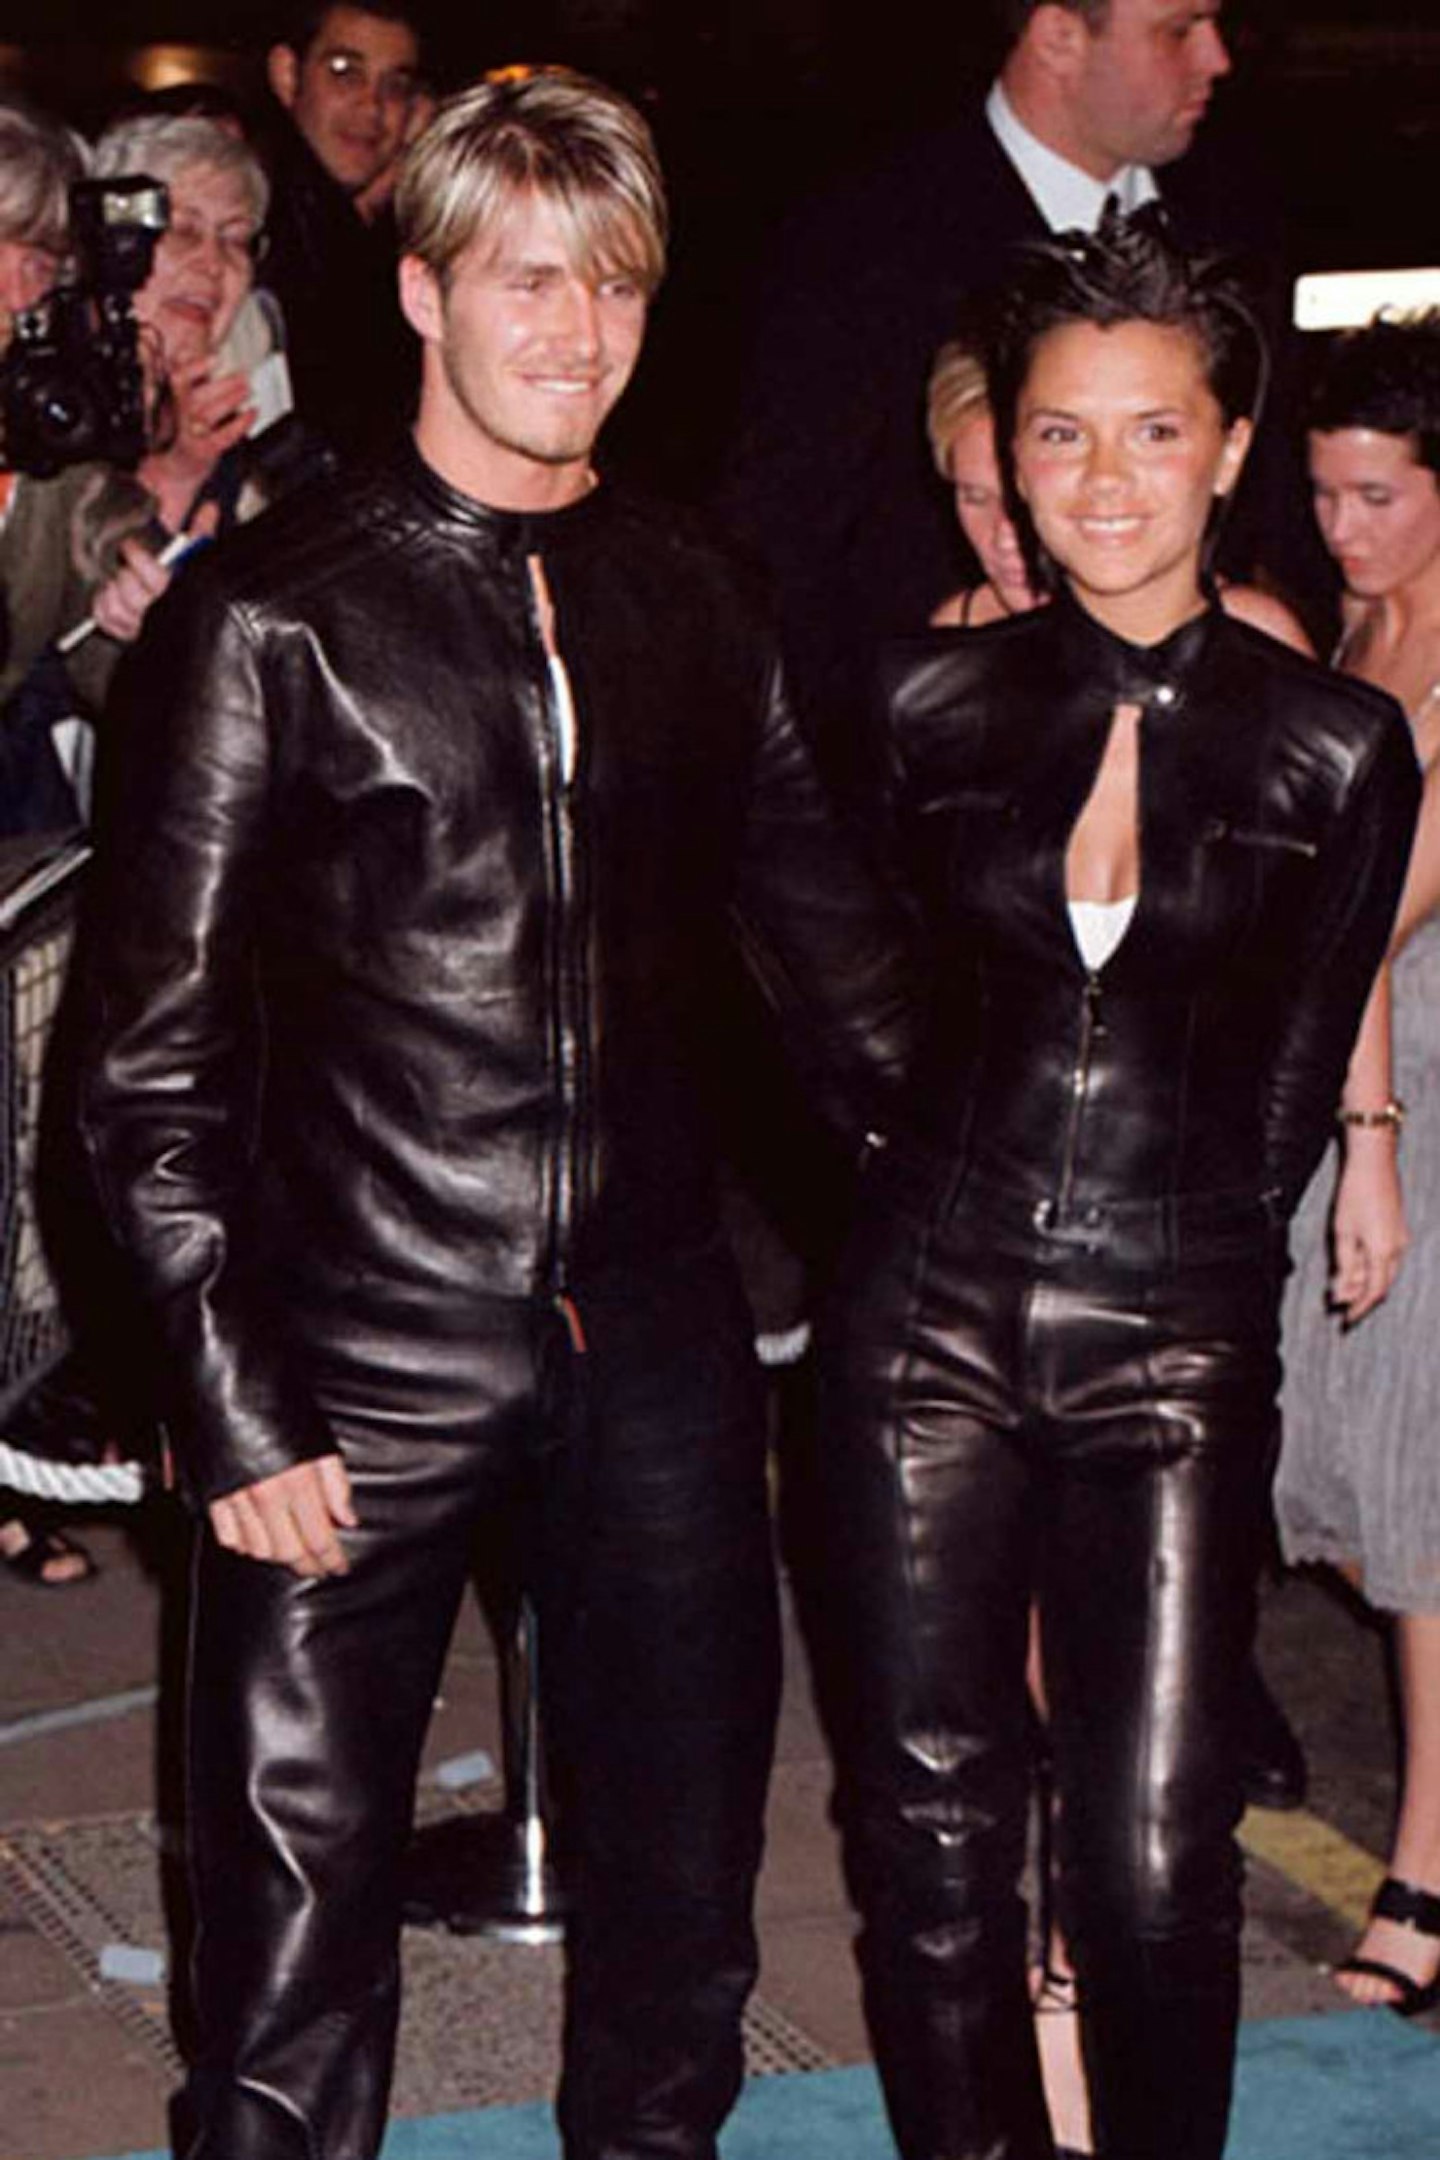 Victoria Beckham style 1999 david leather matching outfits